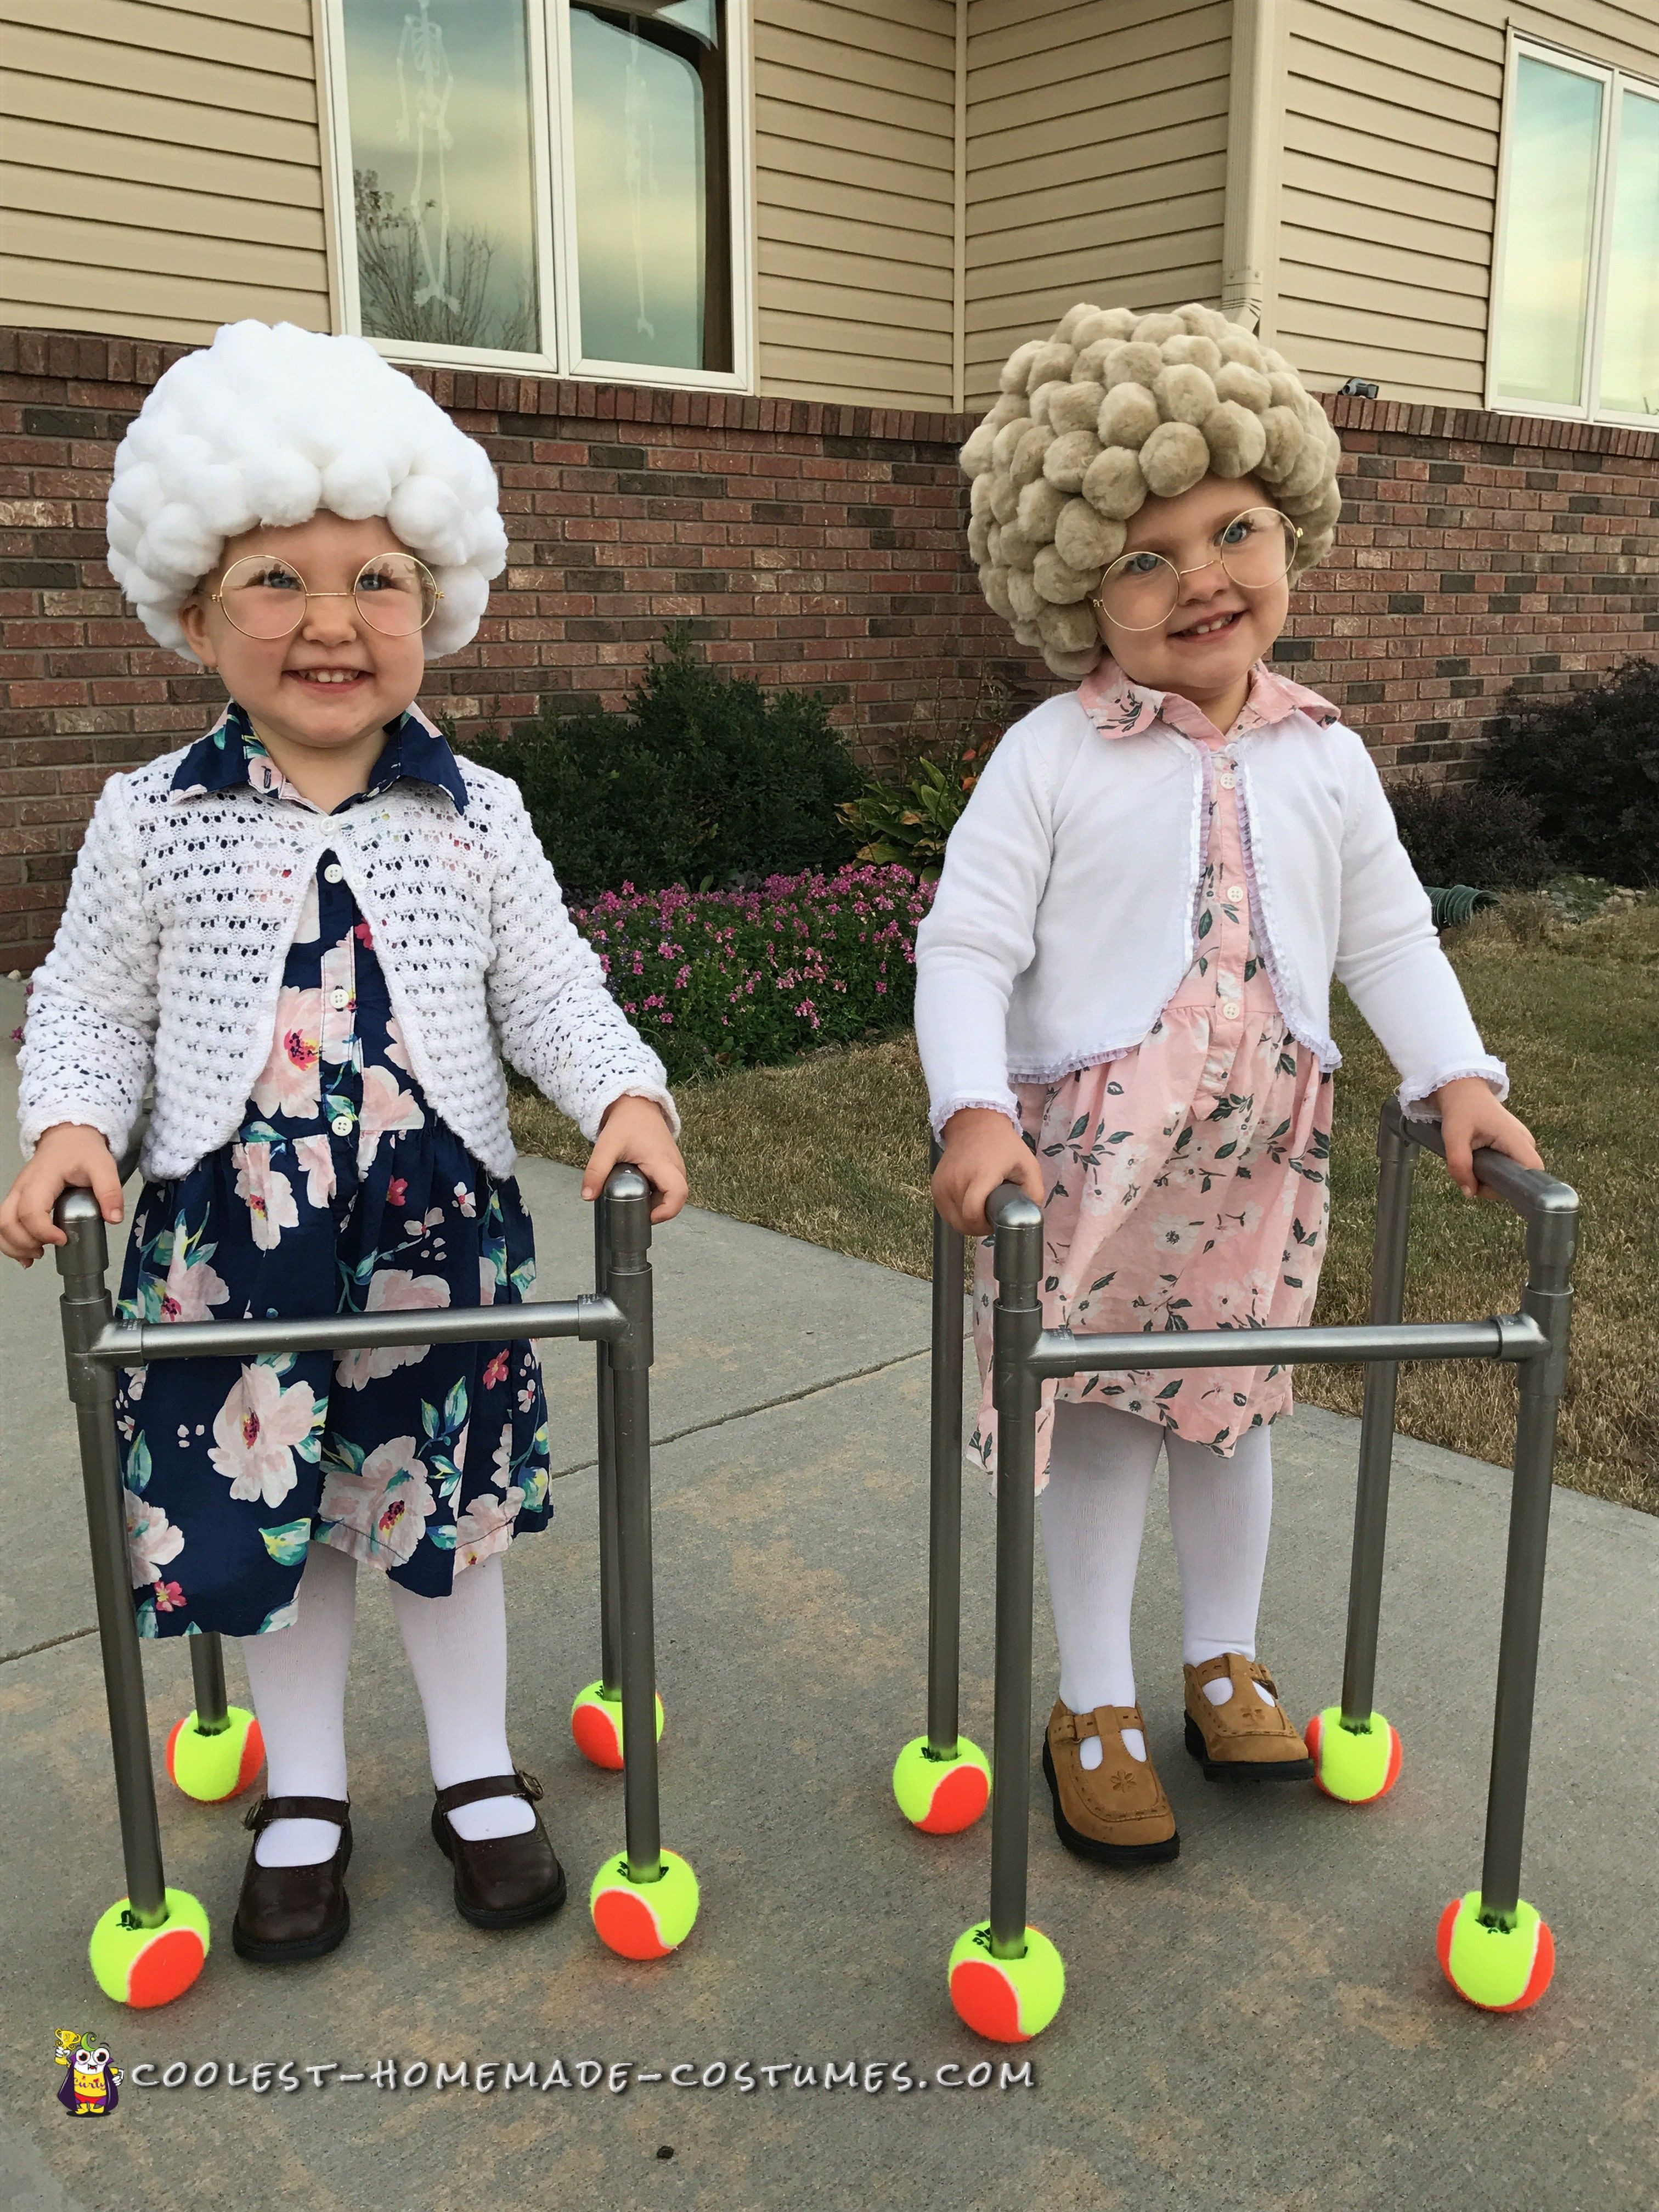 Easy DIY Costumes For Kids
 Easy DIY Adorable Twin Old La s in 2019